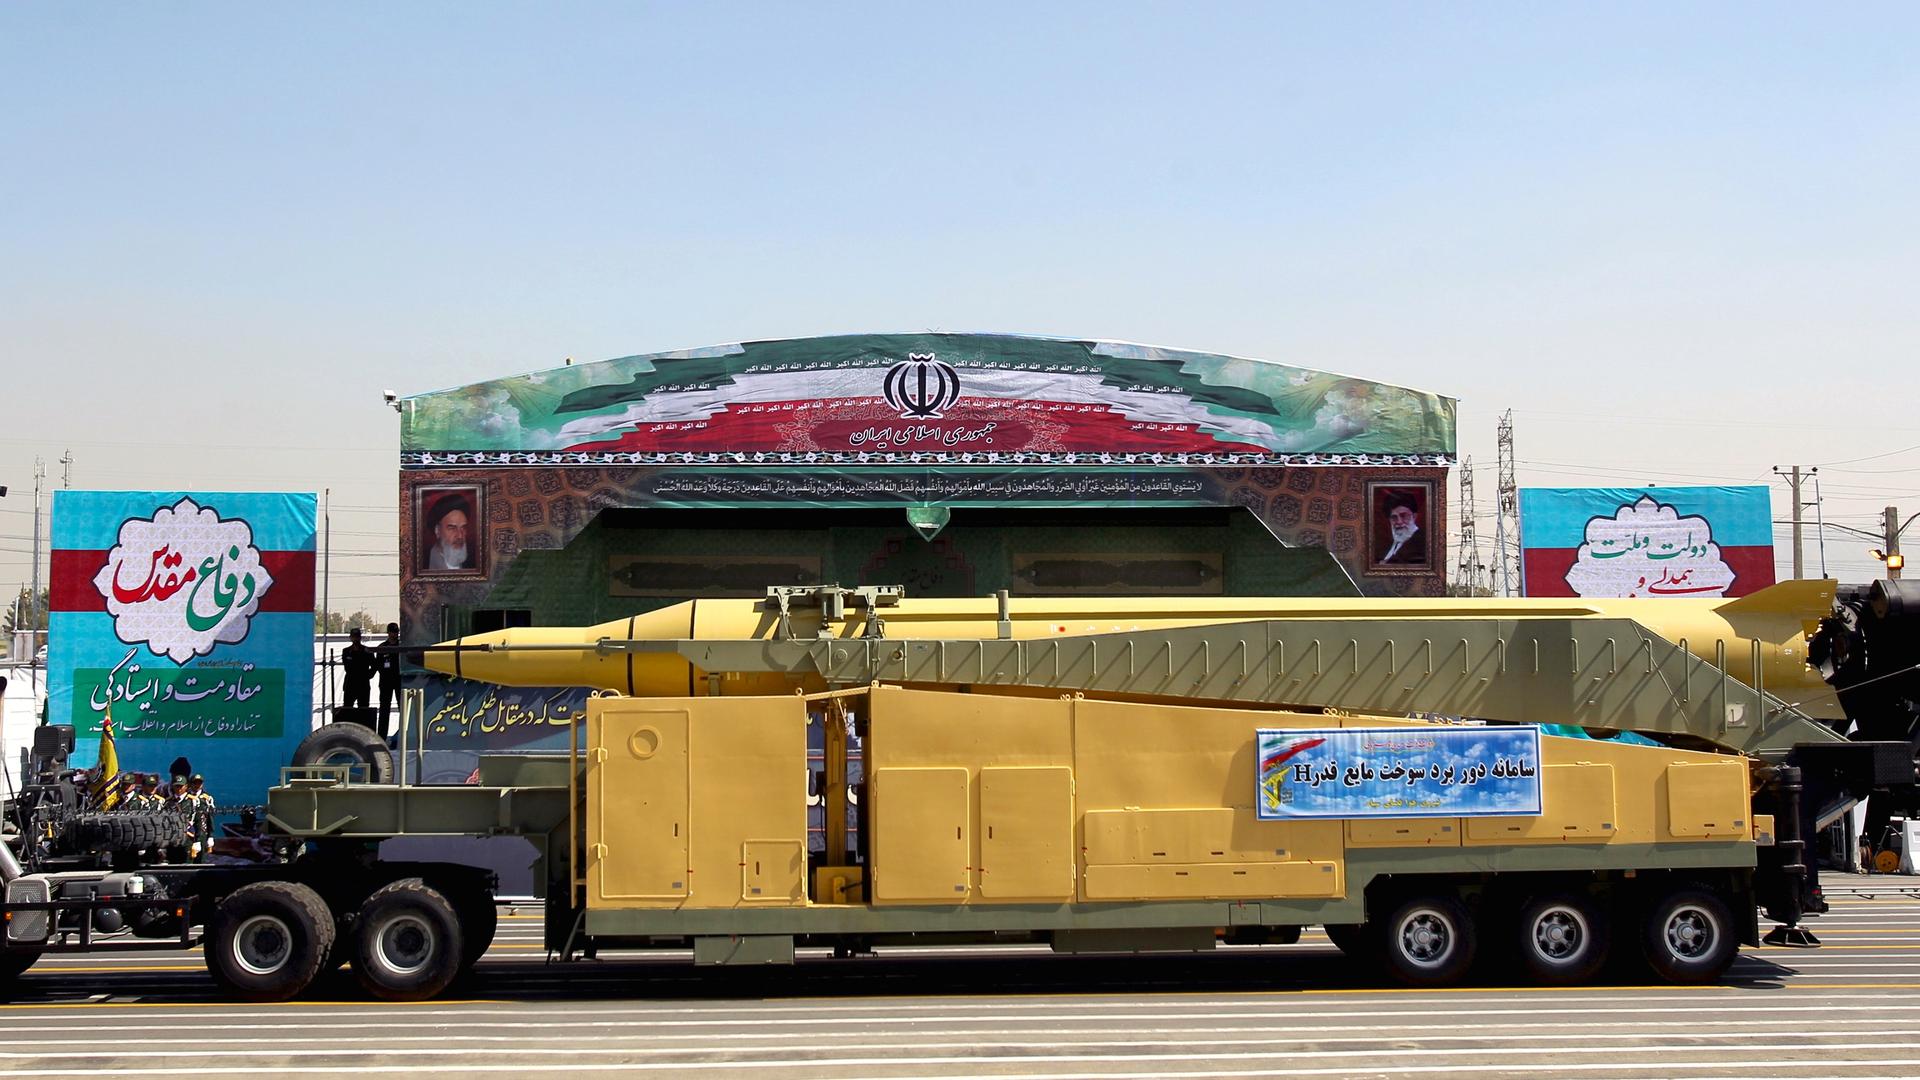 A military truck carrying a Qadr H missile drives past pictures of Iran's Supreme Leader Ayatollah Ali Khamenei (R) and late leader Ayatollah Ruhollah Khomeini during a parade marking the anniversary of the Iran-Iraq war (1980-88), in Tehran on September 